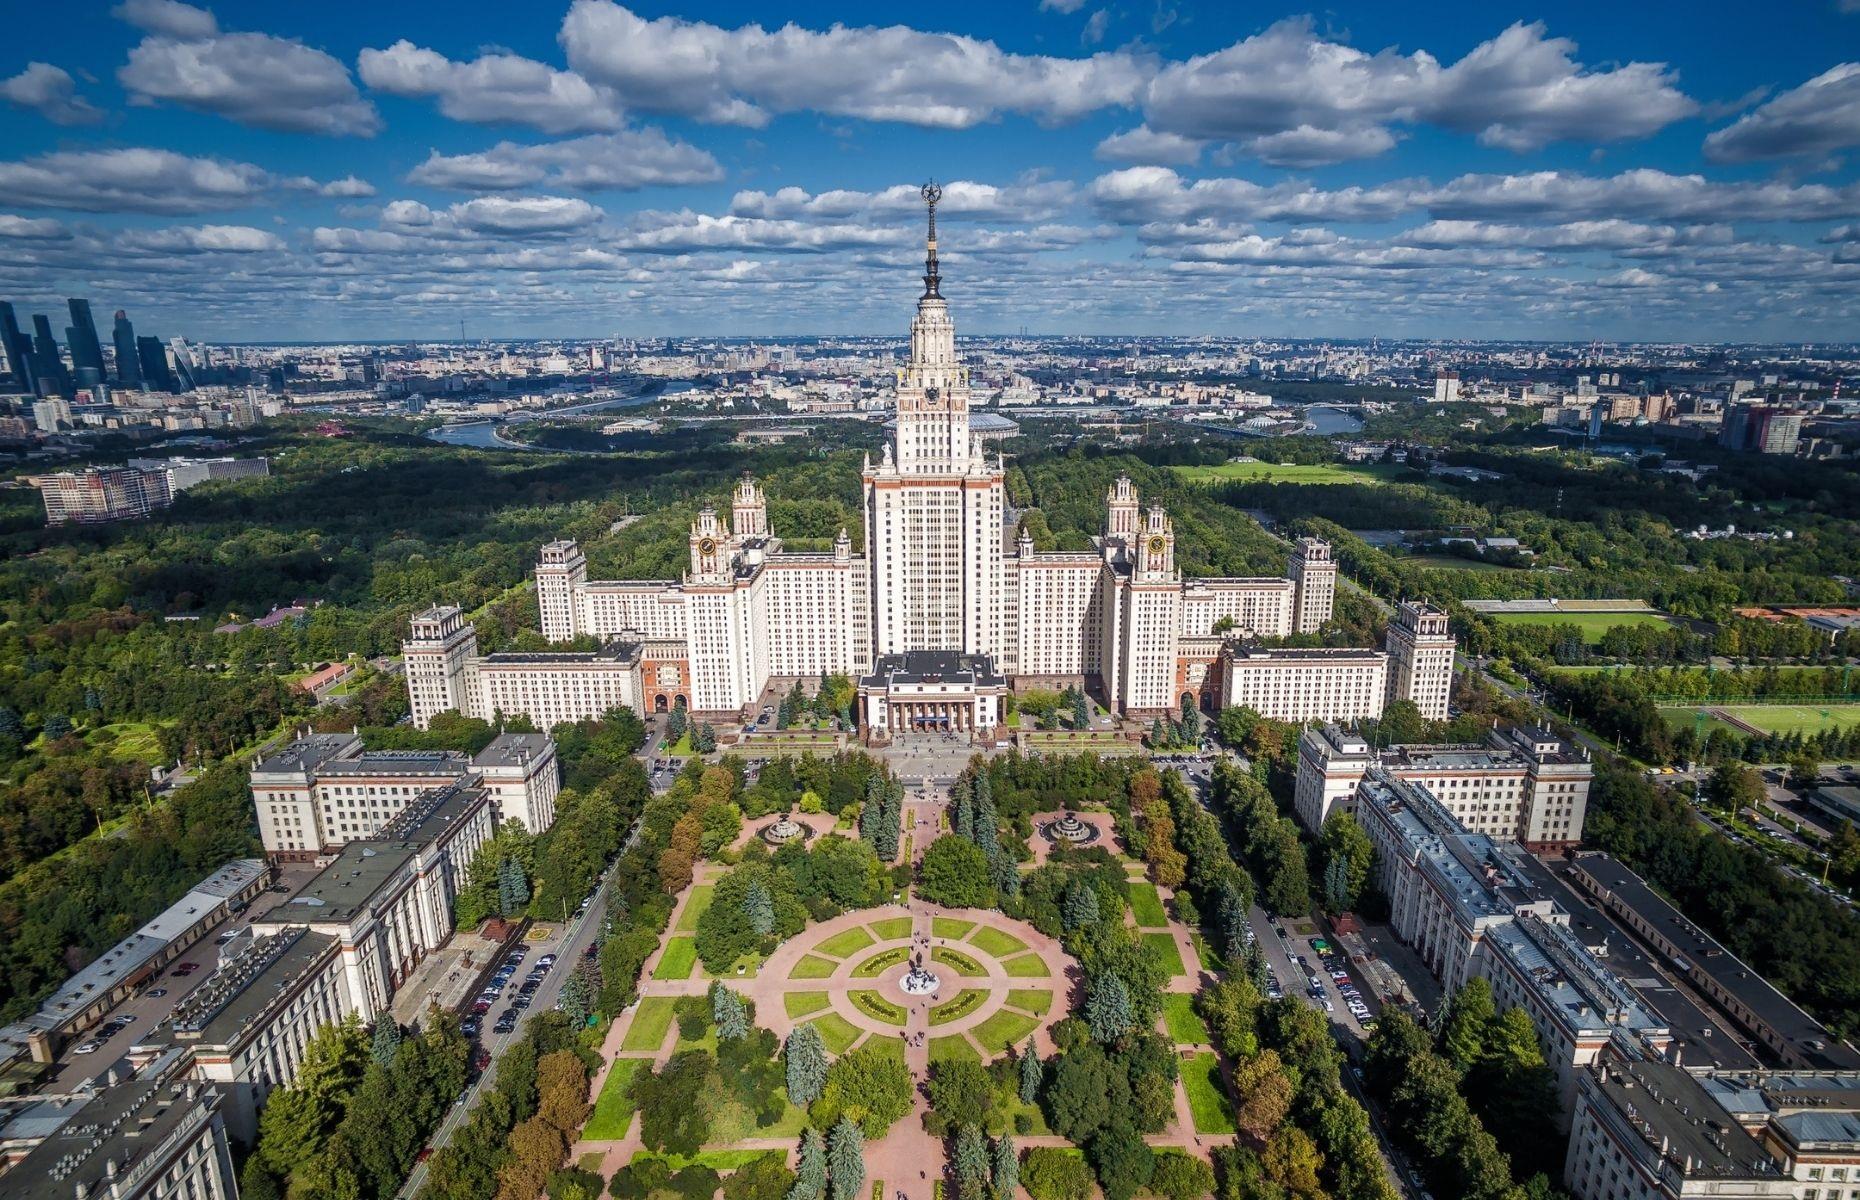 <p>While some of the world's most beautiful universities are well-renowned, others fly under the radar and Russia's Lomonosov Moscow State University is definitely in the latter camp. Founded in 1755 by Russian polymath Mikhail Lomonosov, the institution is home to a dazzling 787-foot-tall (240m) skyscraper. Designed in the Stalinist architectural style, it was built mostly by German prisoners of war. If you're a history buff, you can <a href="http://en.tour.vrmsu.ru/">take a virtual tour</a> of the campus.</p>